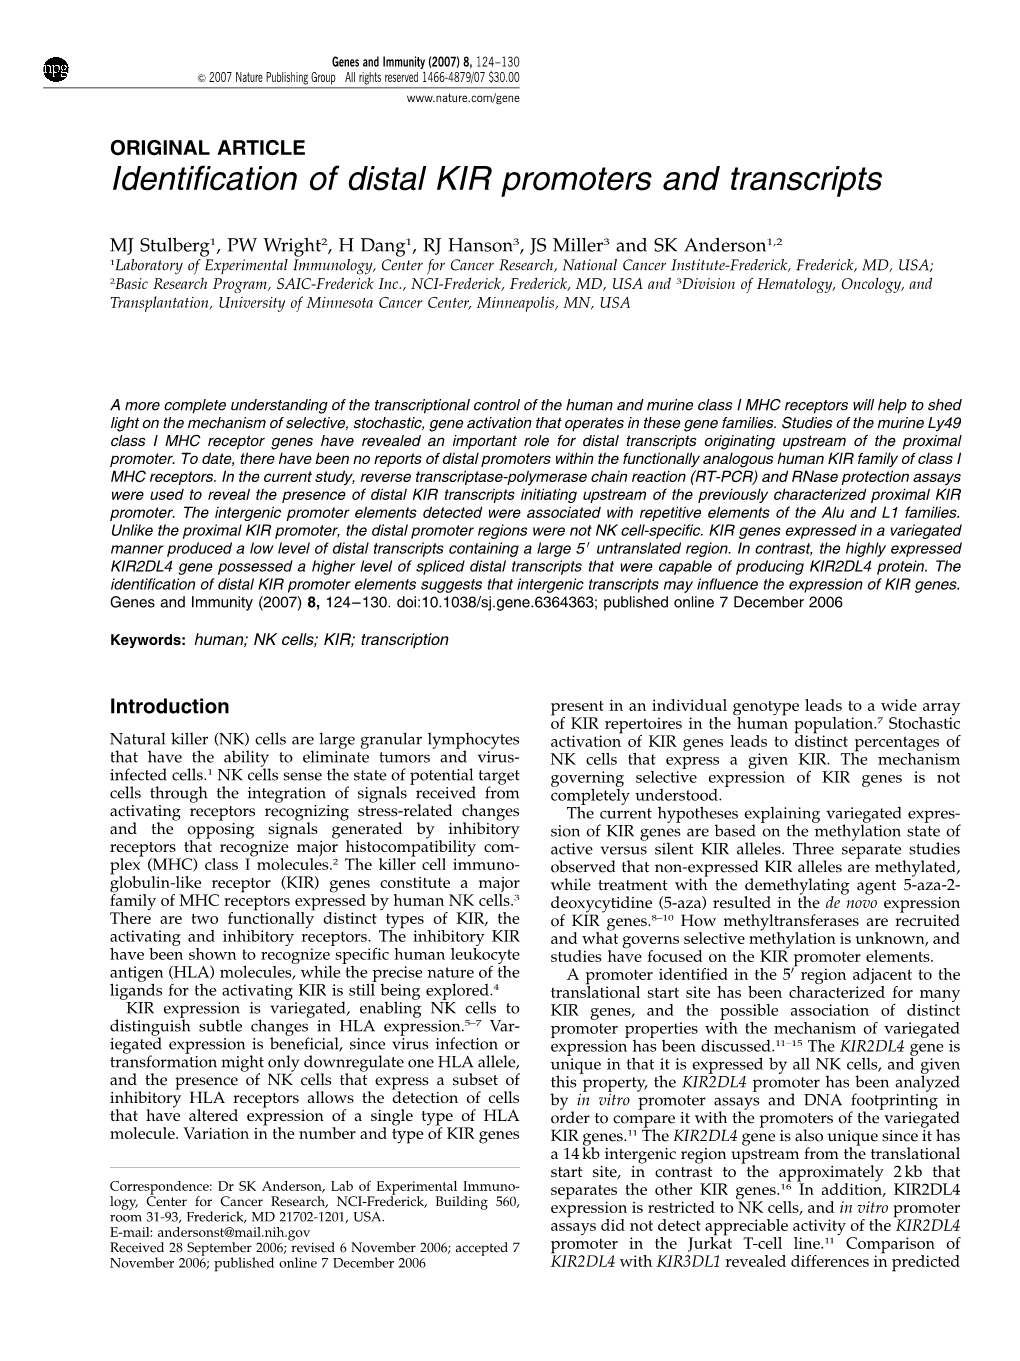 Identification of Distal KIR Promoters and Transcripts